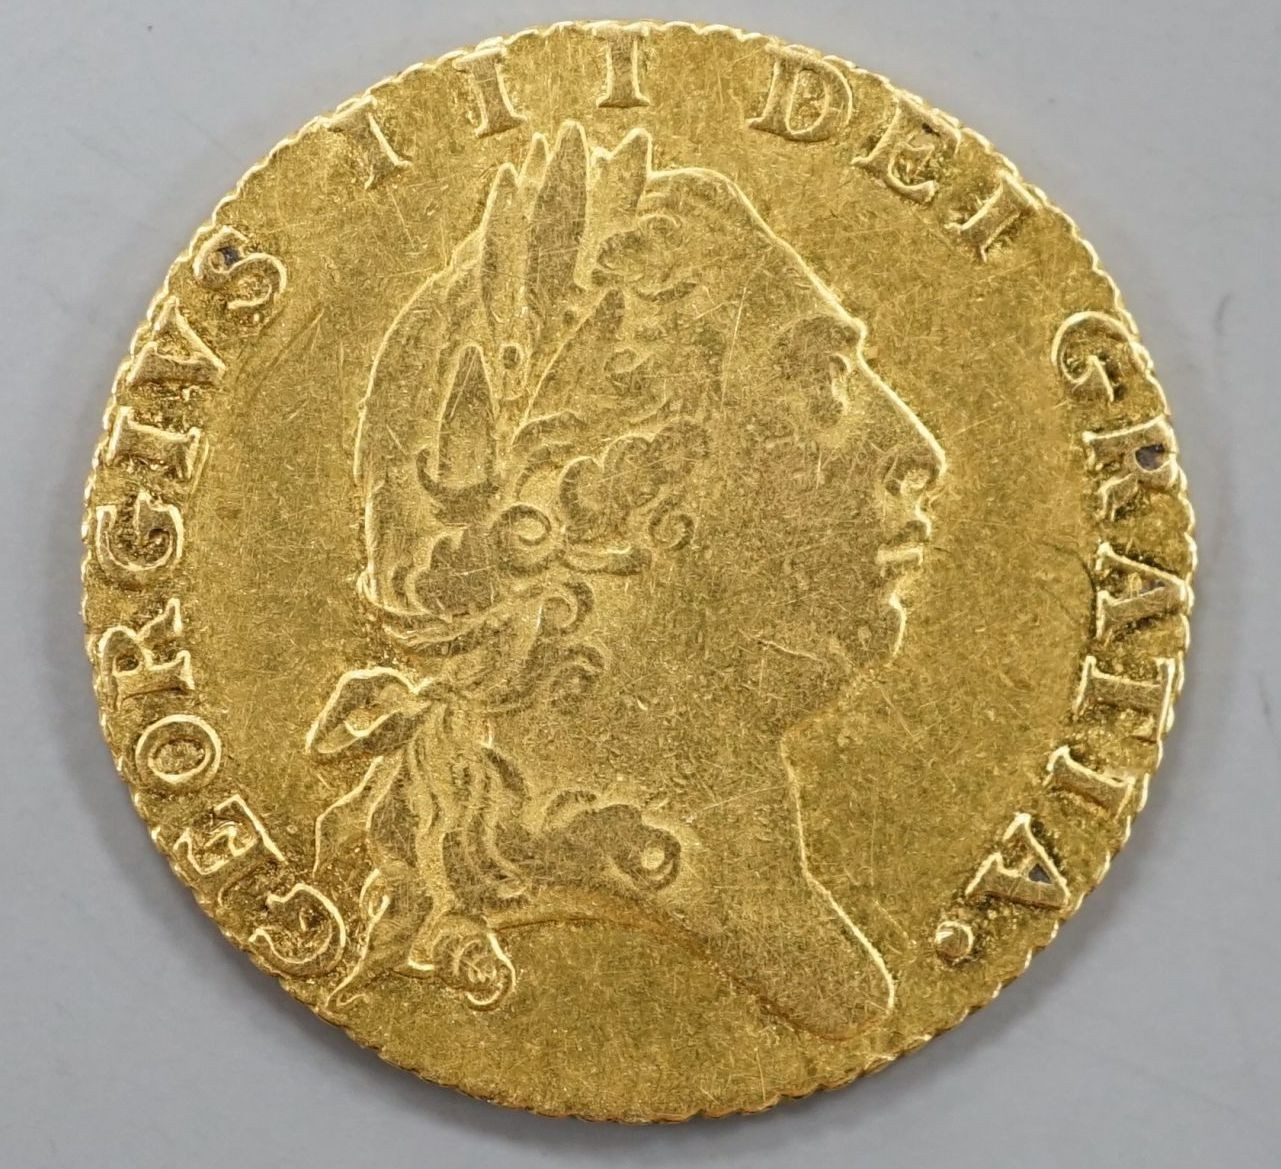 A 1796 gold half guinea, about VF.